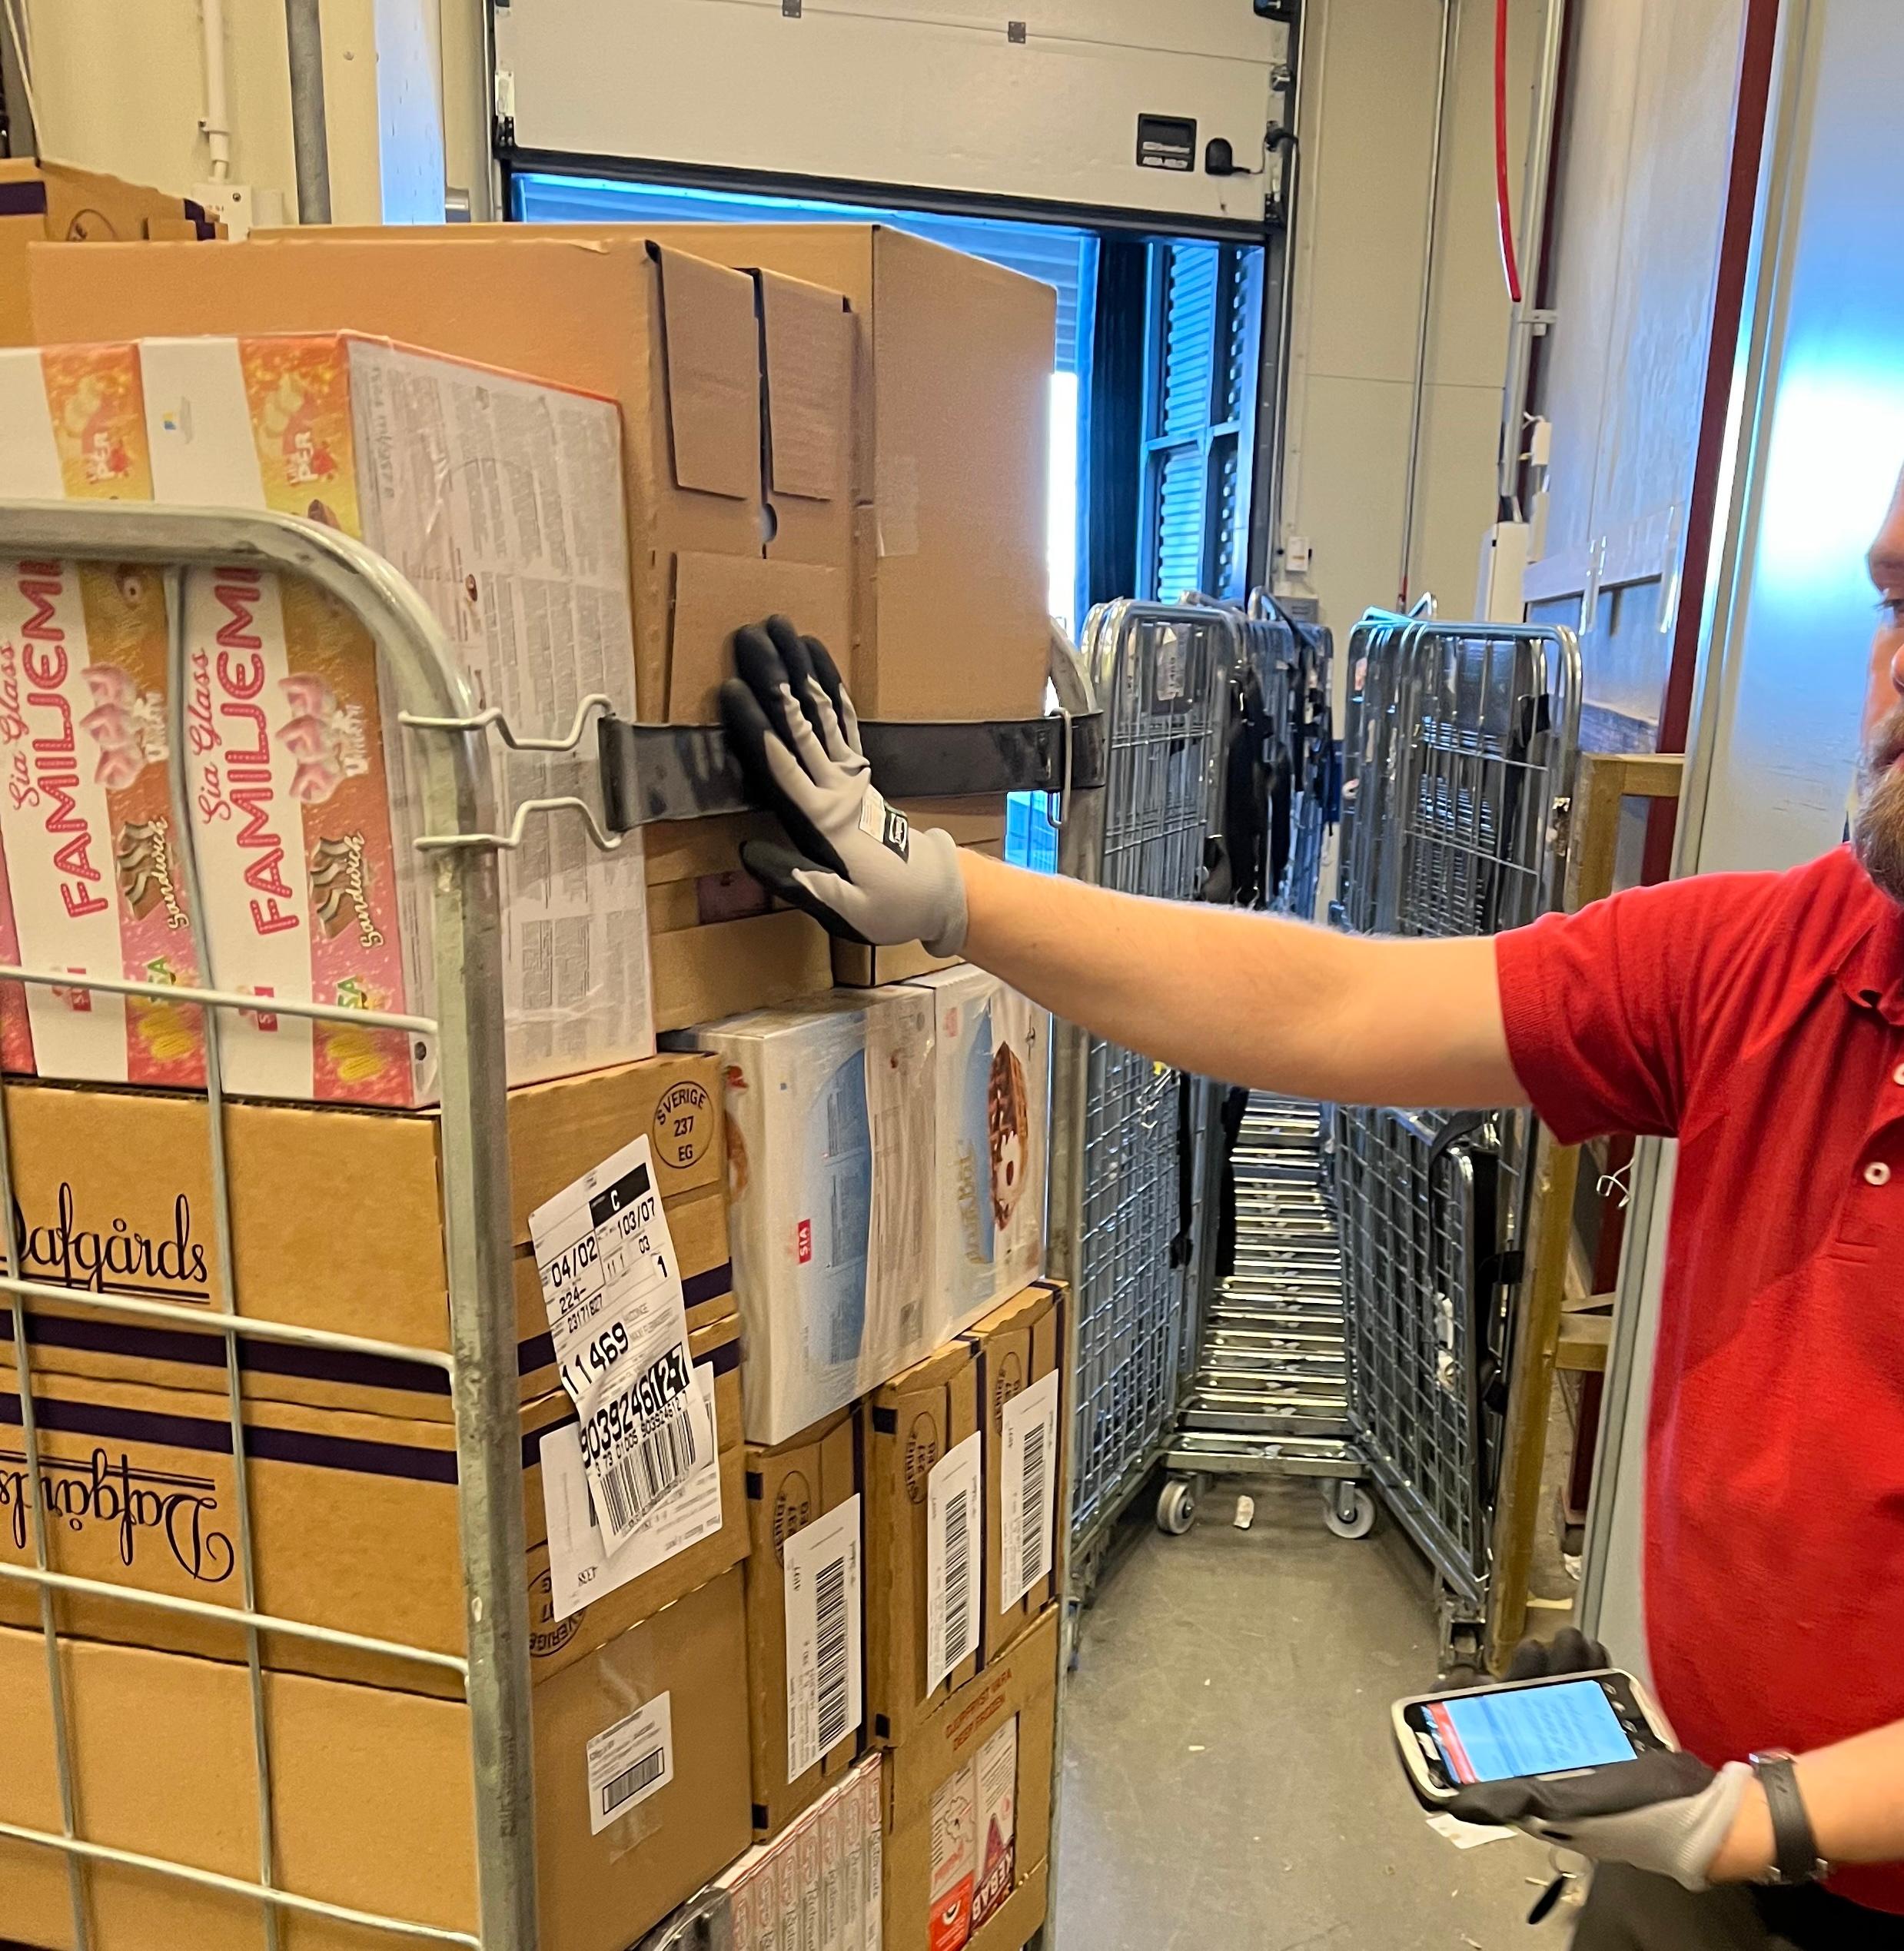 Warehouse worker scans packages with a handheld device.